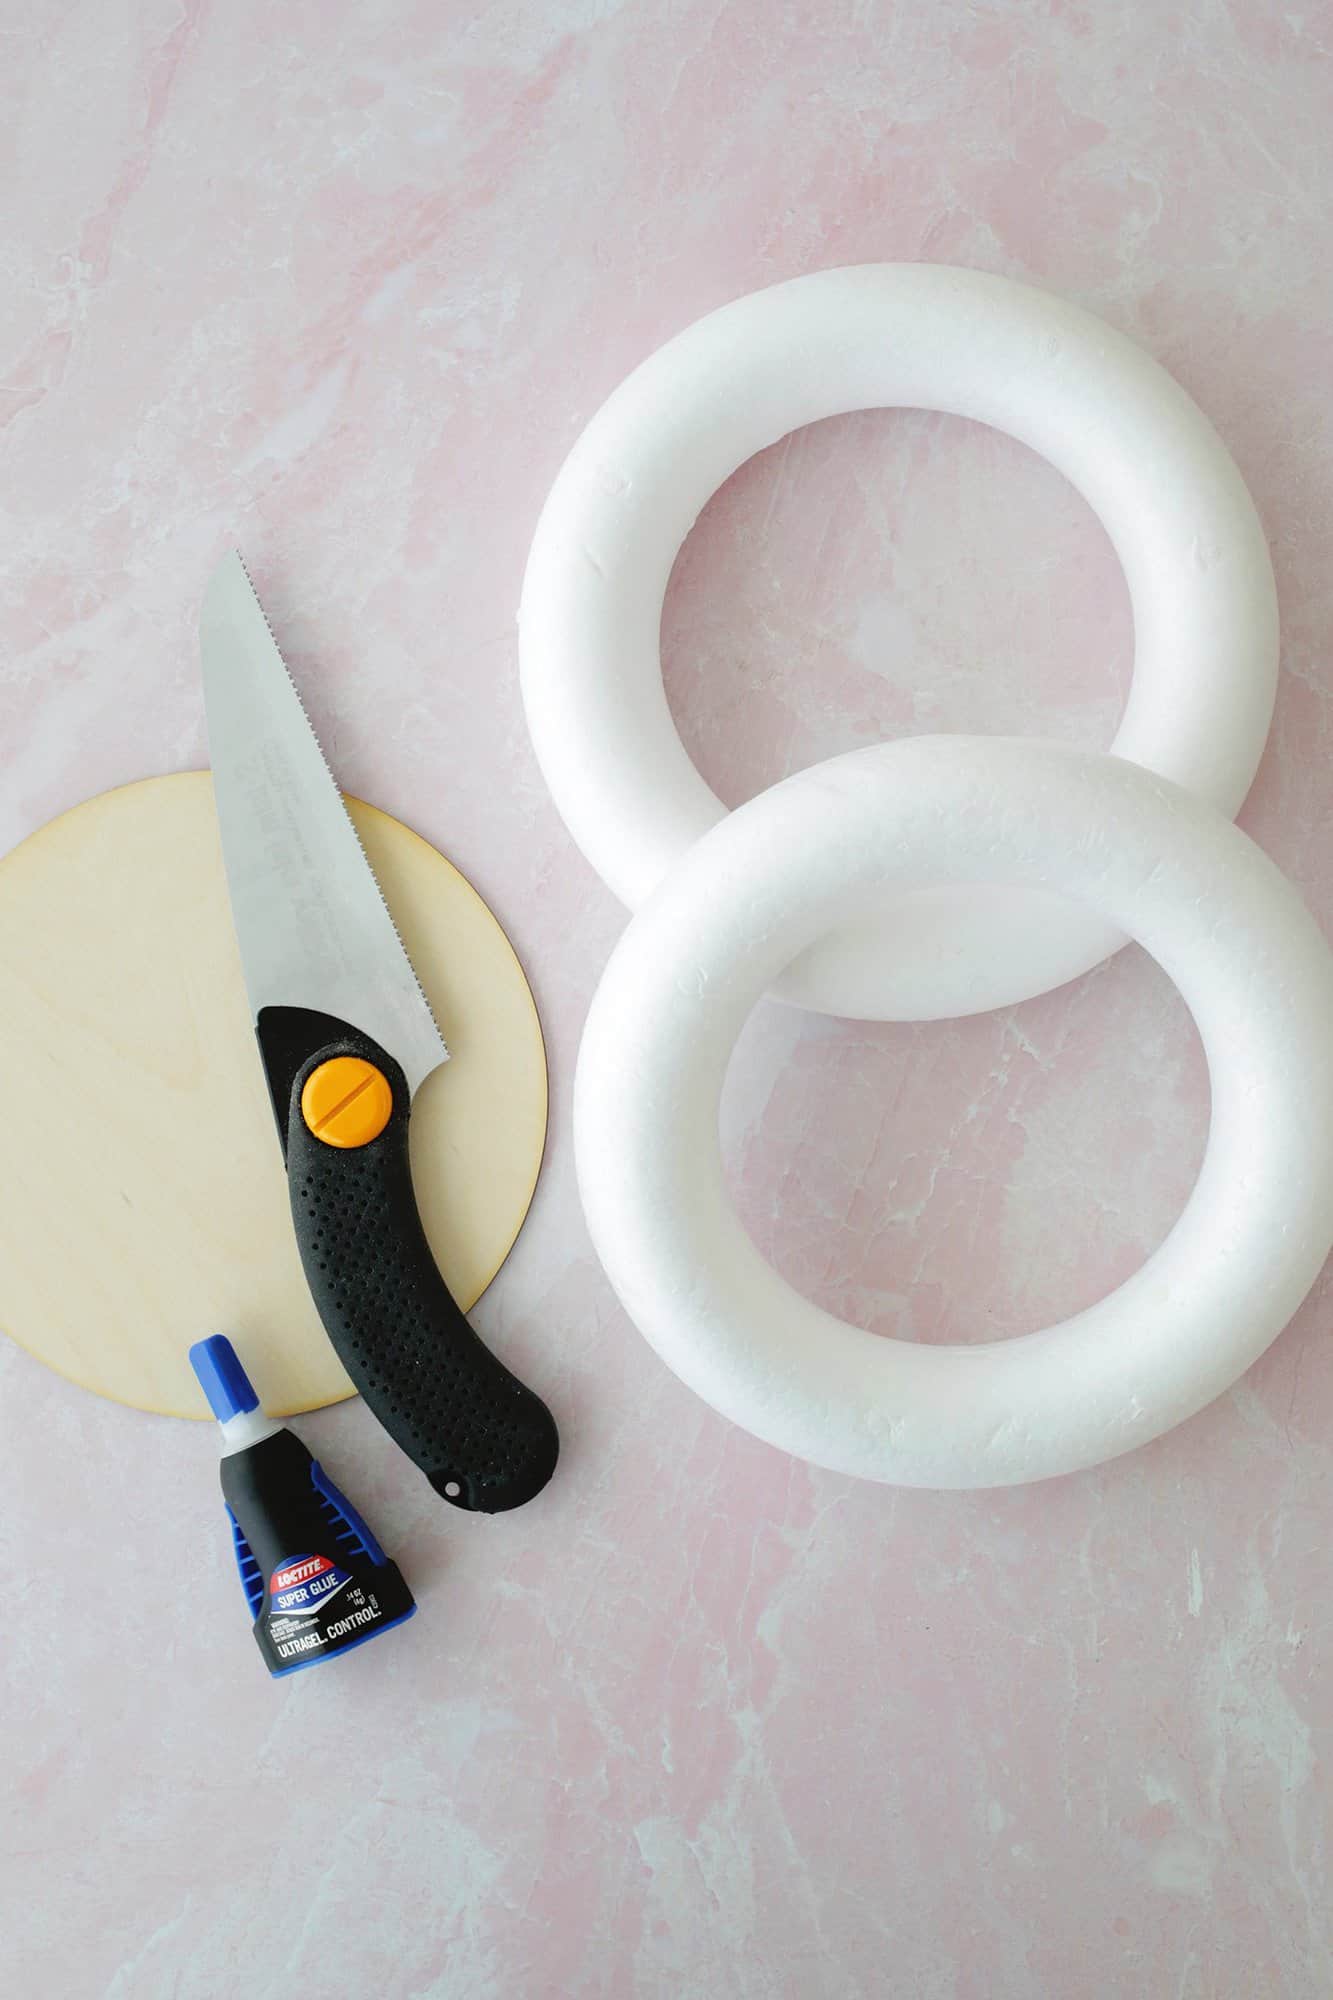 Foam wreath rings, a wooden circle and glue, and a handsaw